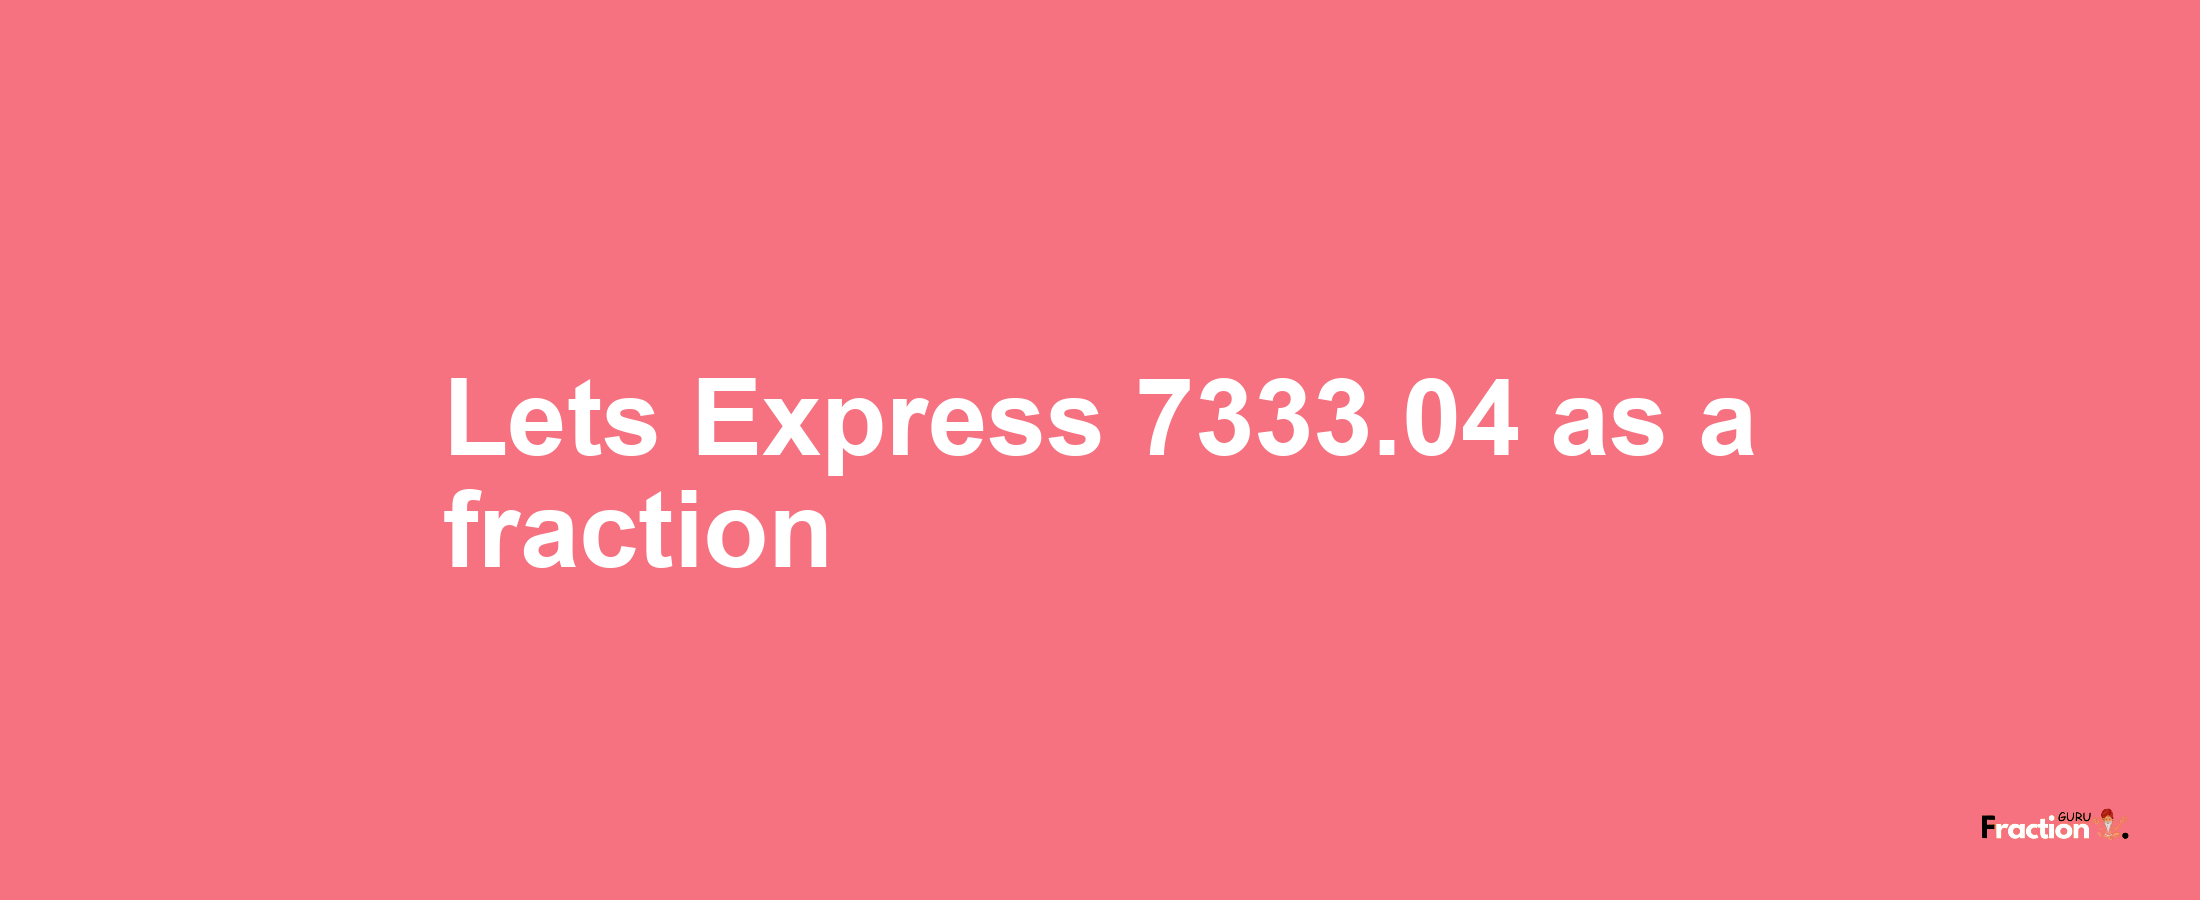 Lets Express 7333.04 as afraction